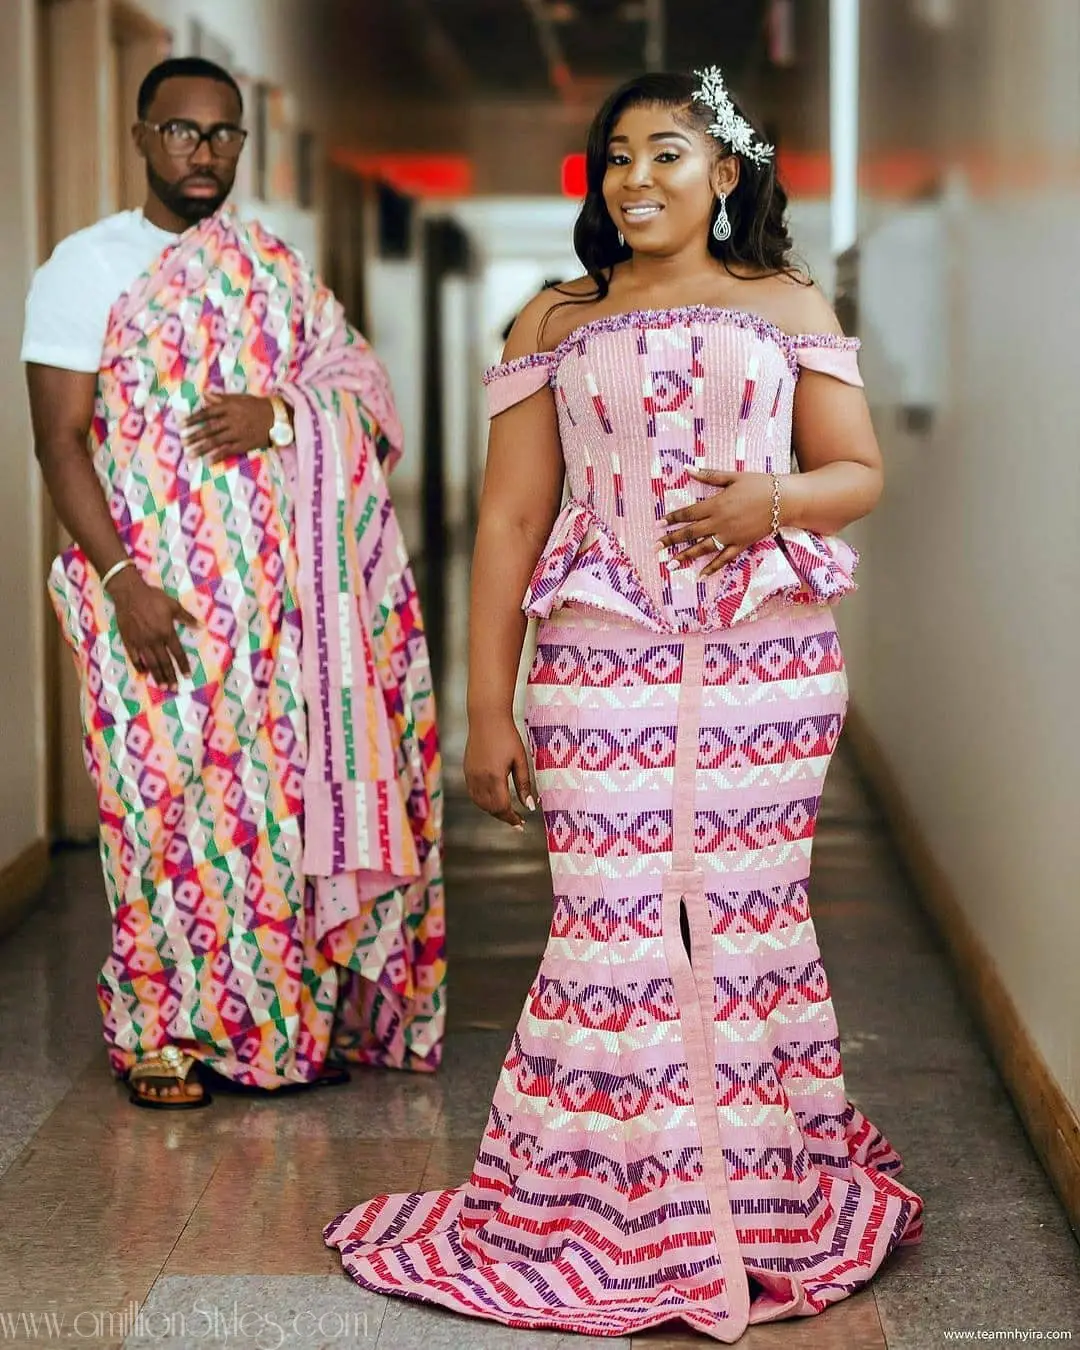 Do You Agree These Are Some Of The Best Kente Styles Ever?!